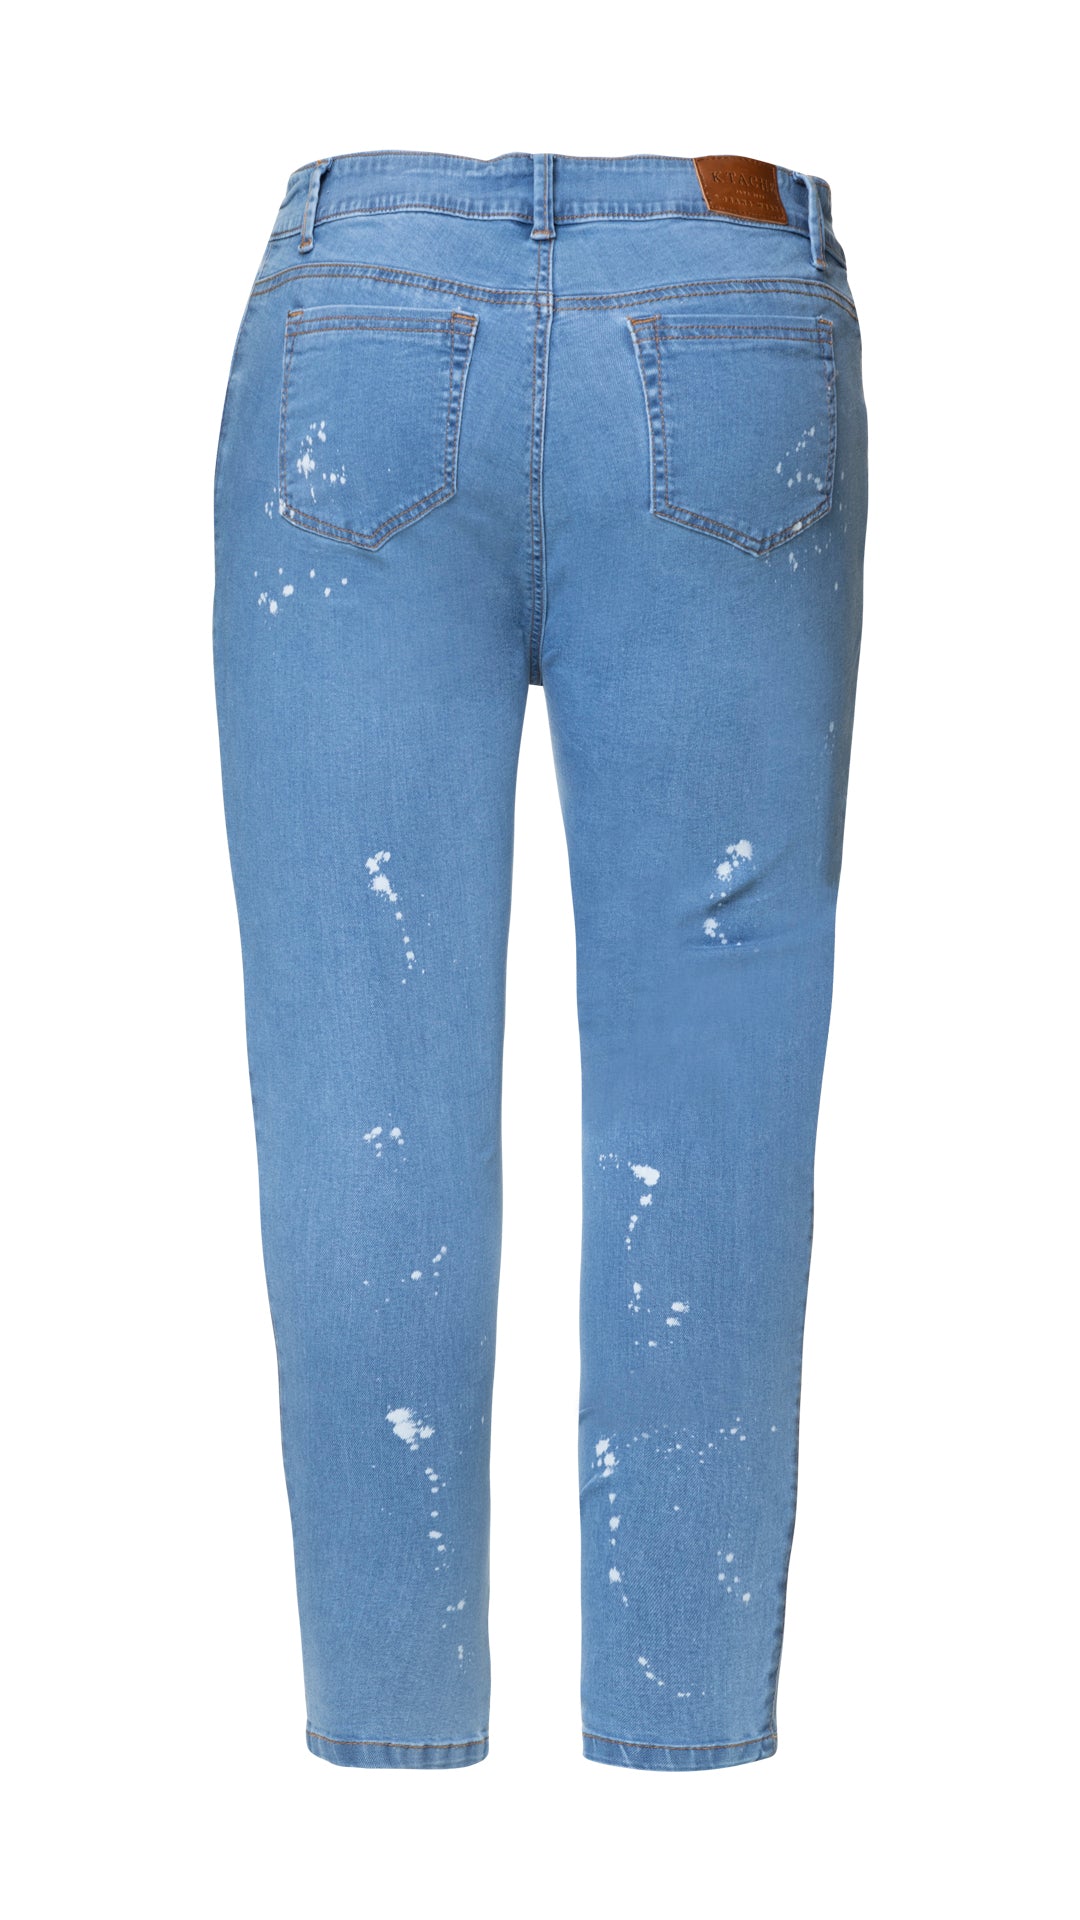 Isis Details Jeans